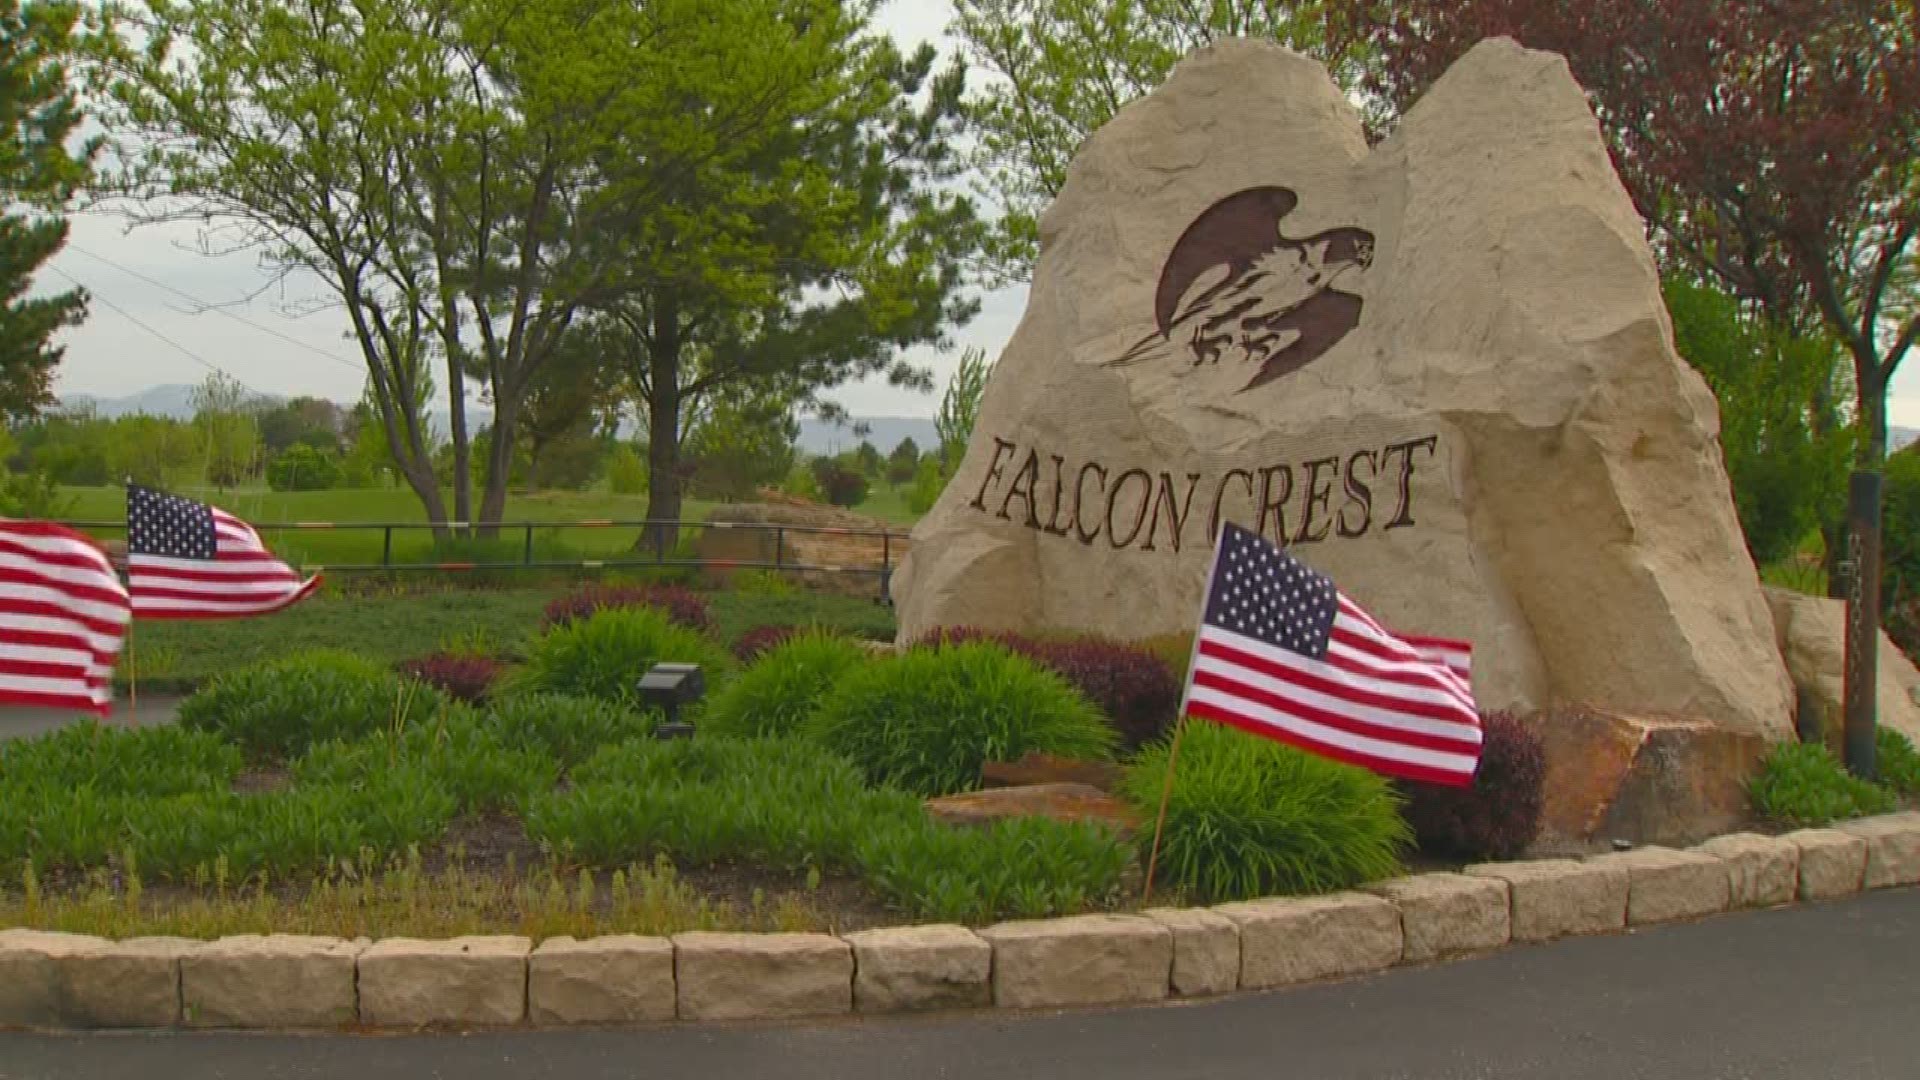 The event was held at Falcon Crest golf course in Kuna.